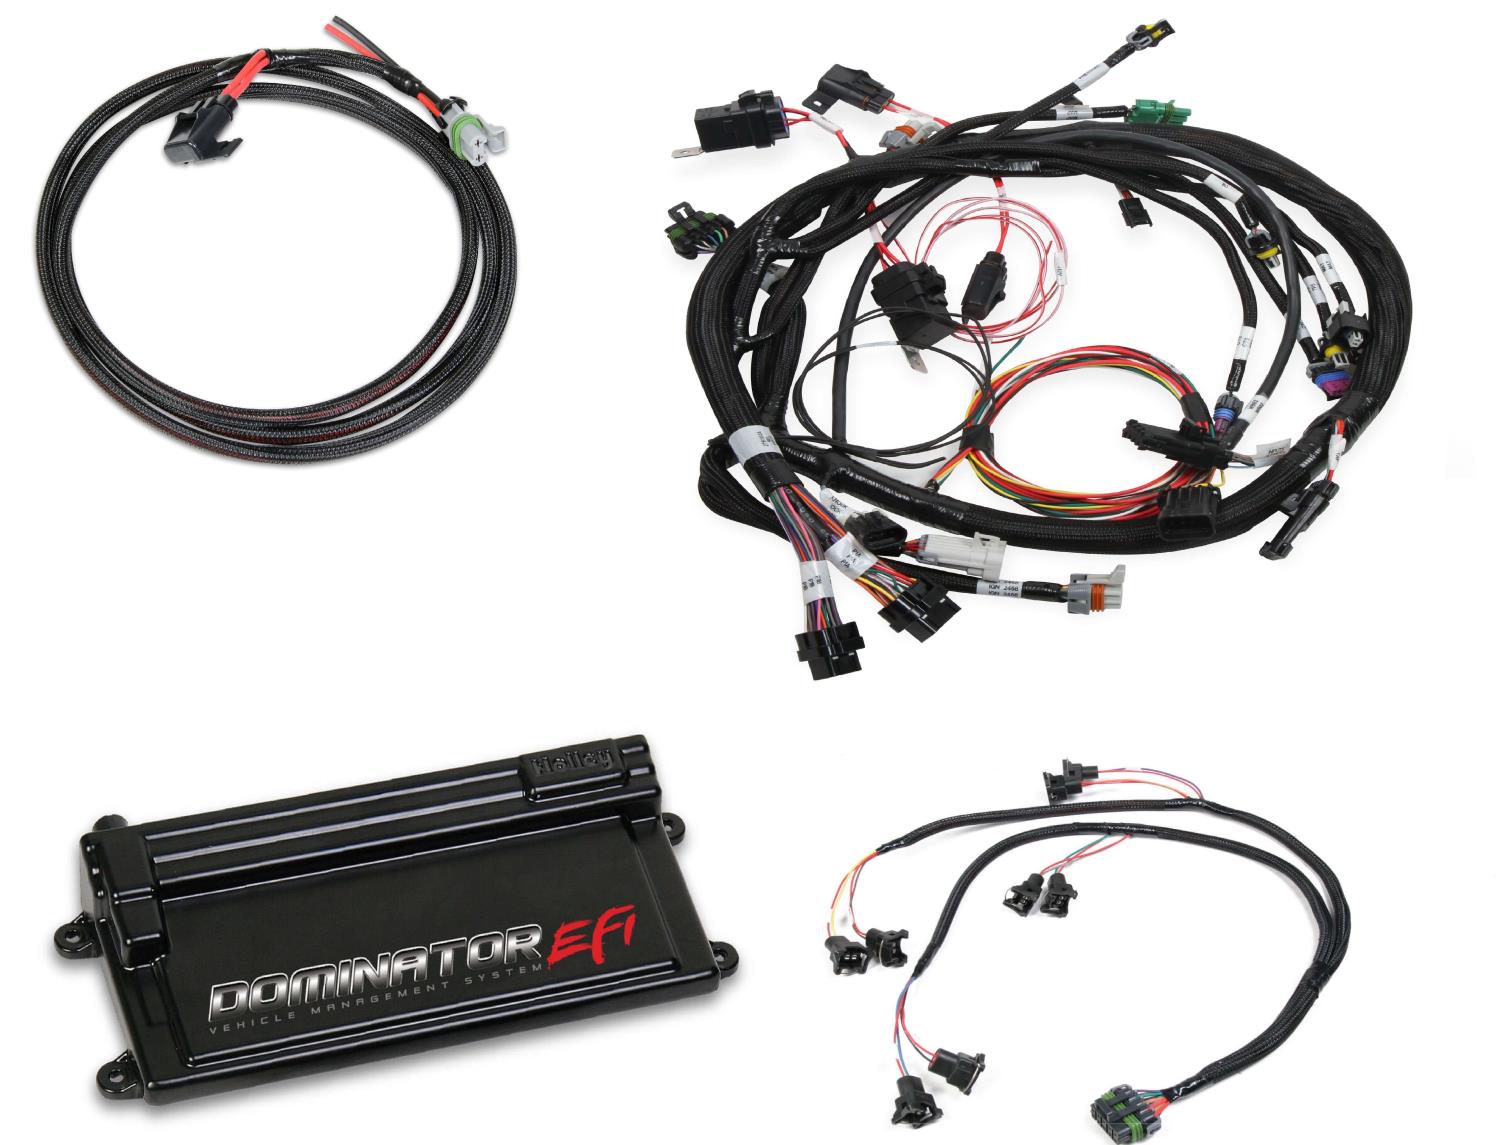 Dominator EFI ECU with Universal (Chevy & Chrysler Engines) Main Harness w/Coil-On-Plug Sub Harness and EV1 Injector Harness